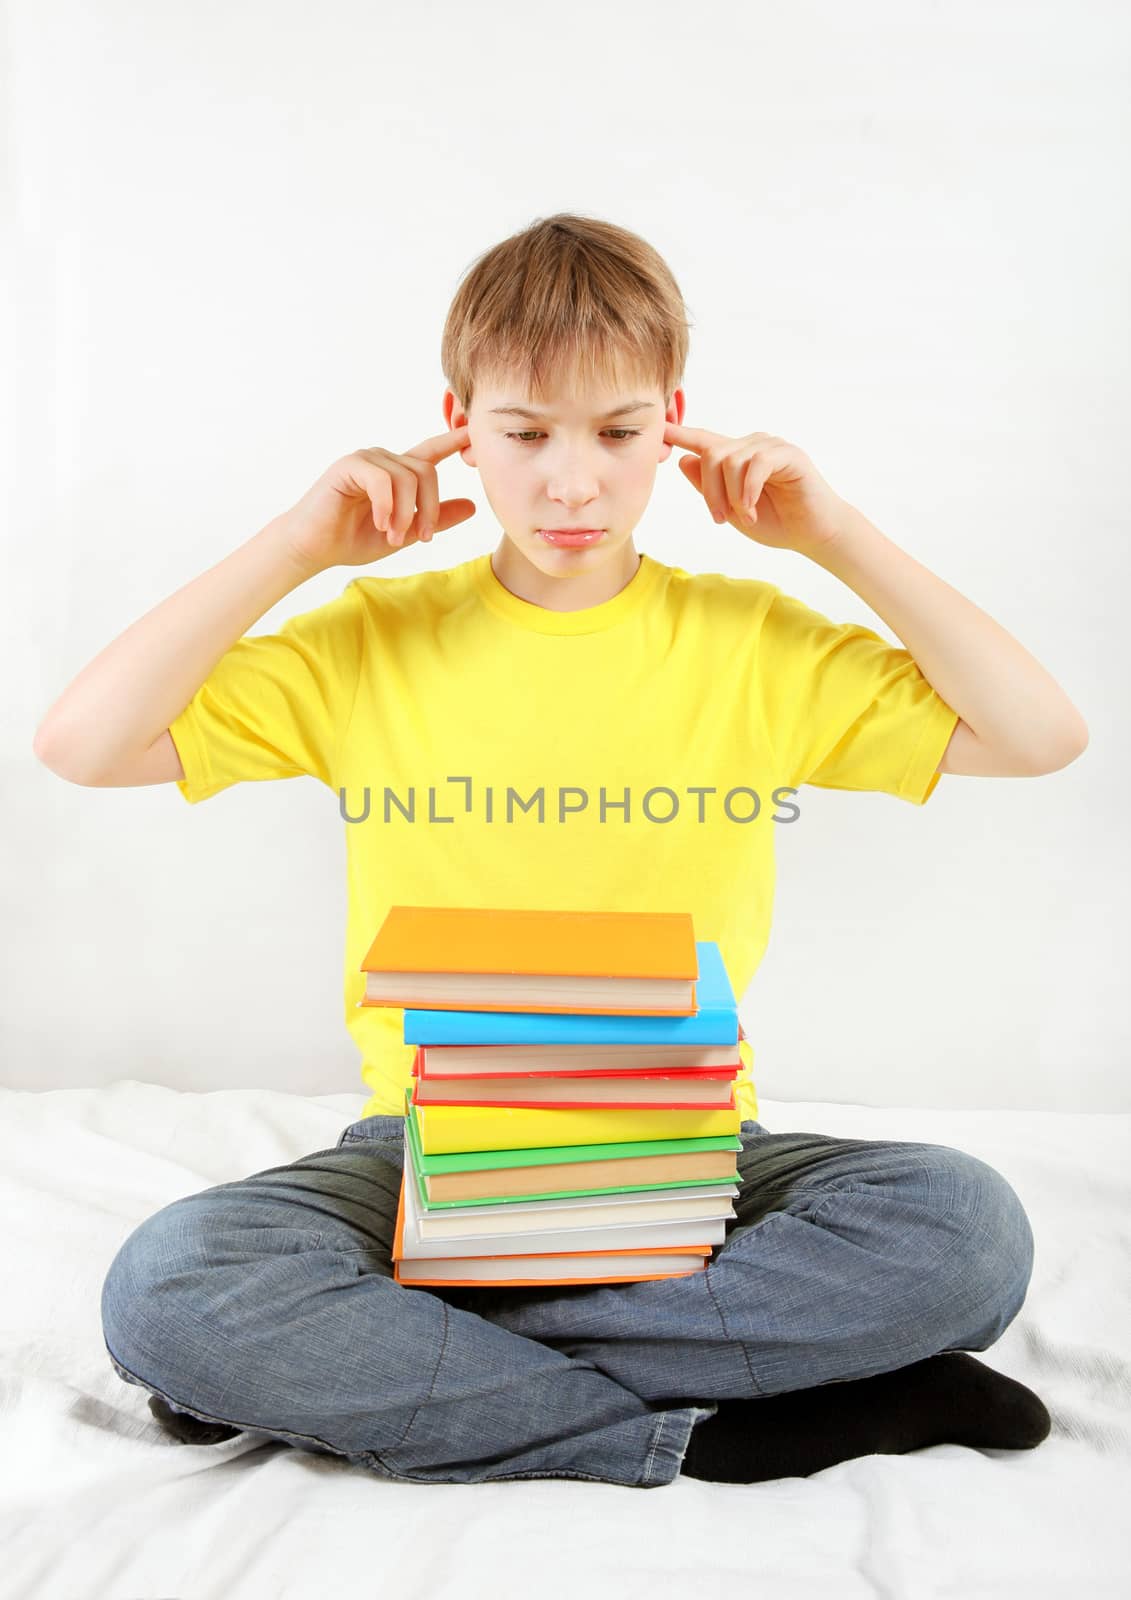 Stressed Kid with a Books cover the Ears on the Bed